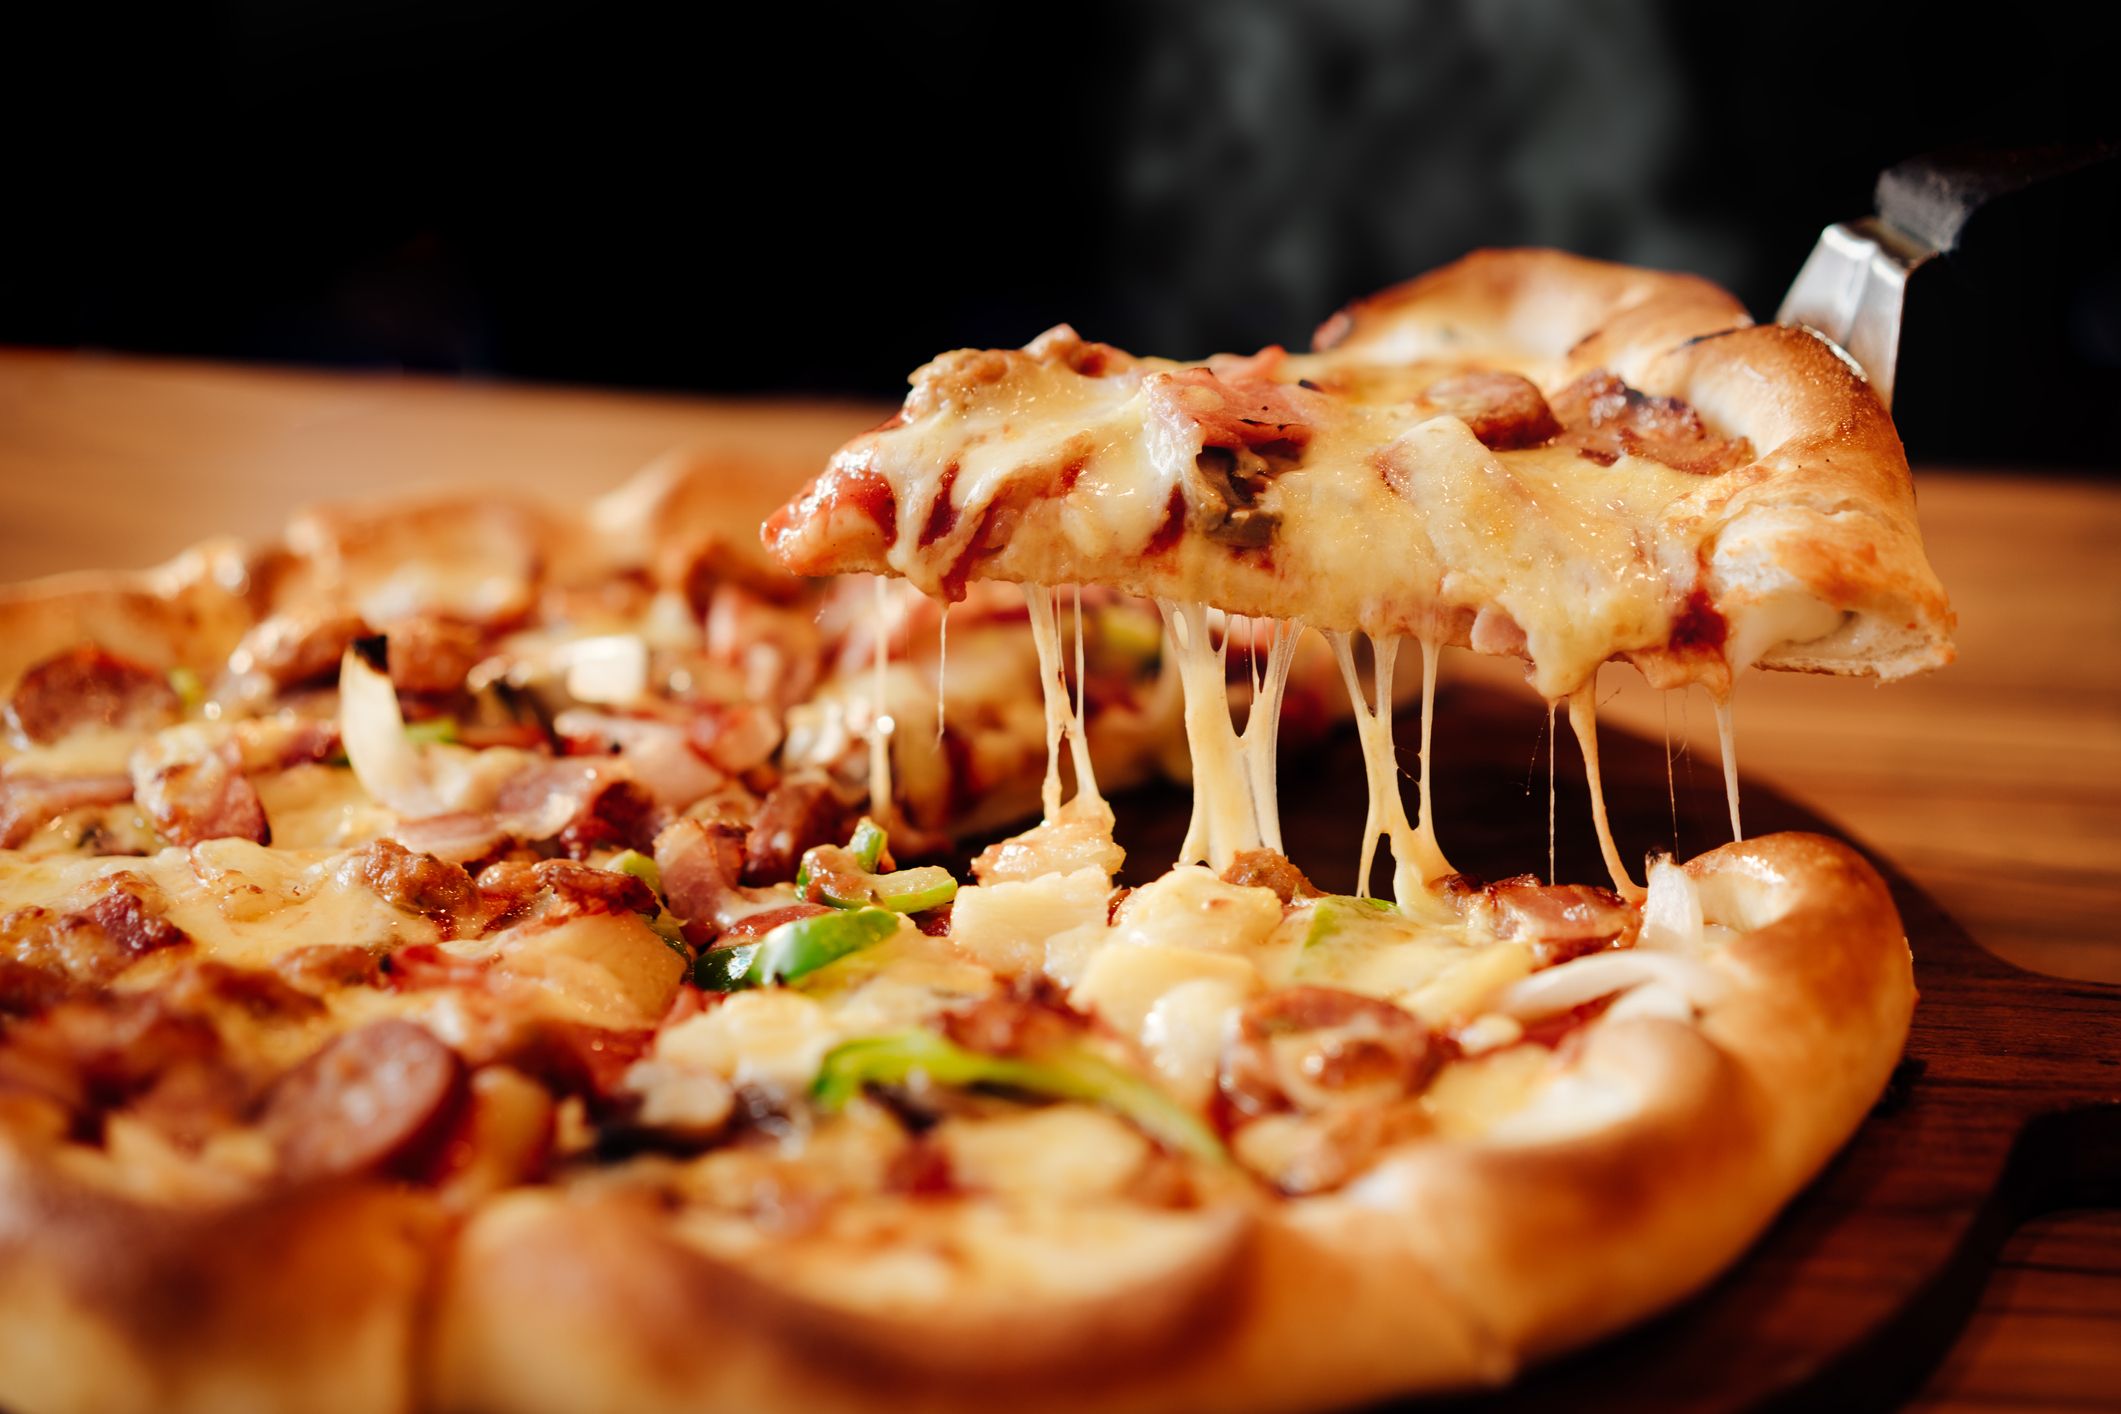 close-up-of-pizza-on-table-royalty-free-image-995467932-1559051477